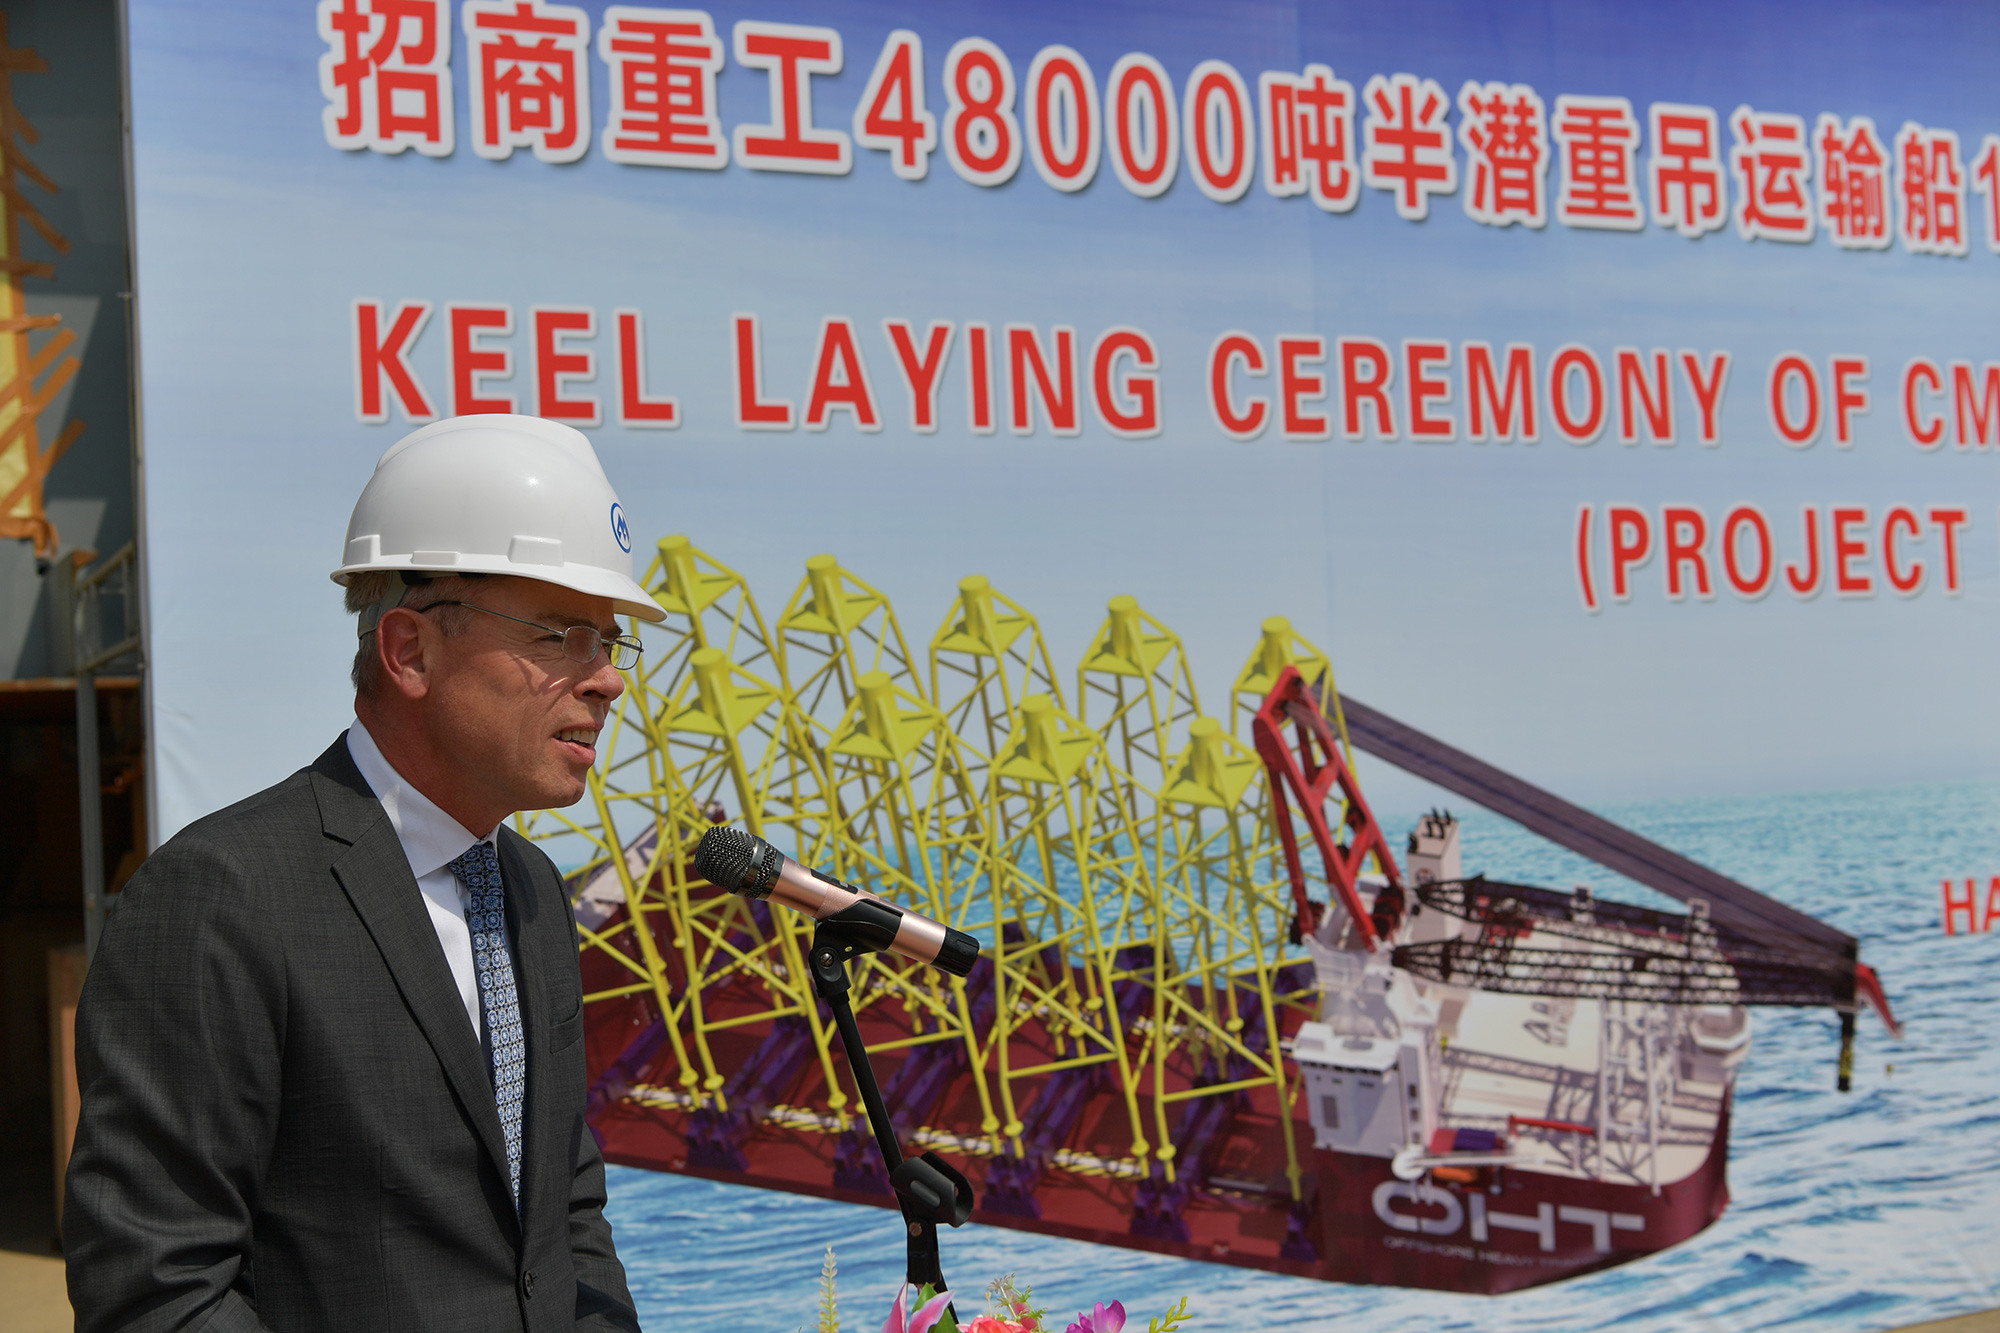 Keel laying for the OHT Alfa Lift vessel